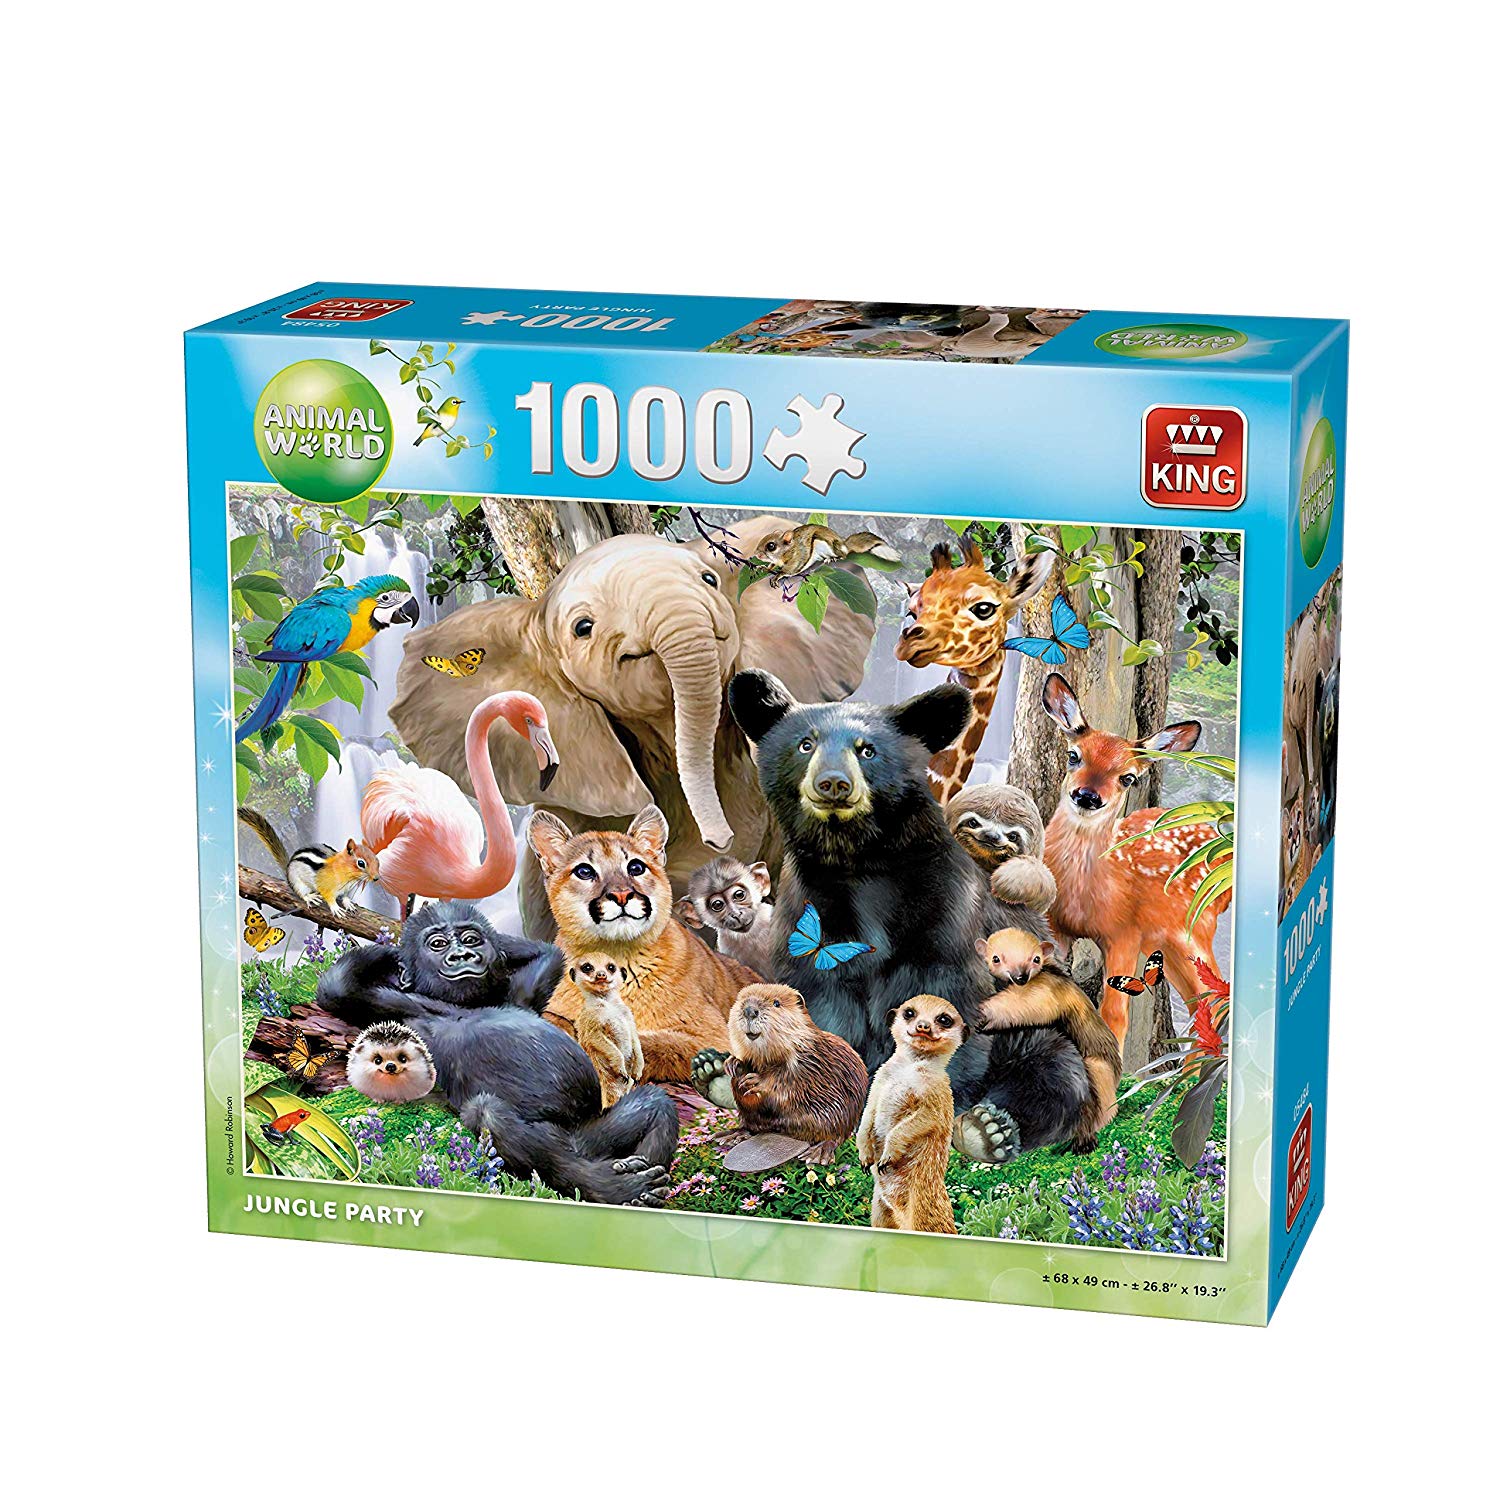 Jungle Party Jigsaw Puzzle (1000 Pieces) King